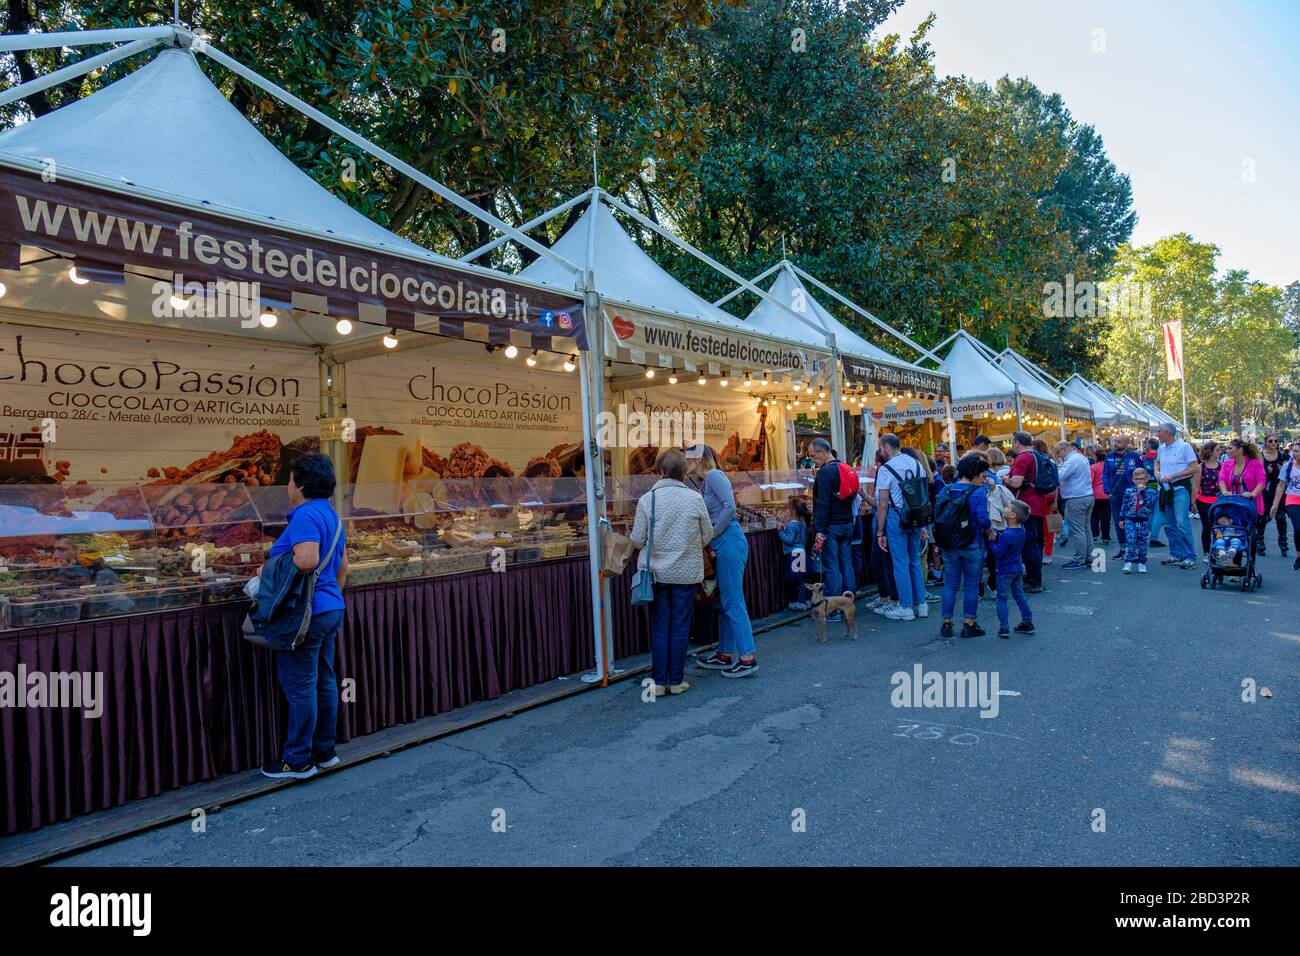 People buying chocolate in stands at a chocolate fair at Villa Borghese park, Rome, Italy. Stock Photo